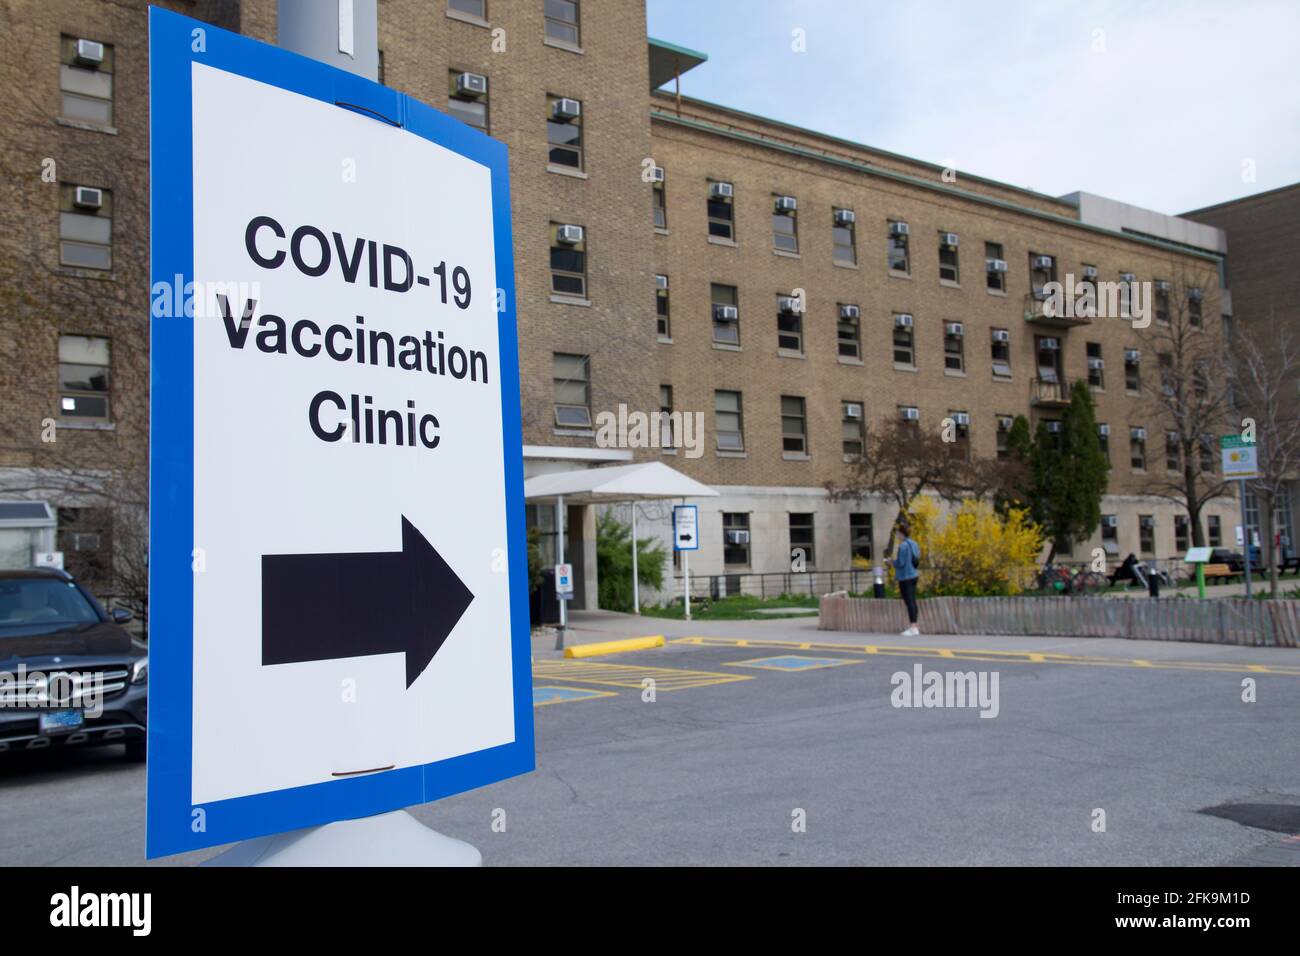 Toronto, Ontario, Canada - 27th April 2021: A direction sign was put up to show the entrance to the COVID-19 Vaccination Clinic ( Sunnybrook Hospital ) in Toronto, Canada. Stock Photo